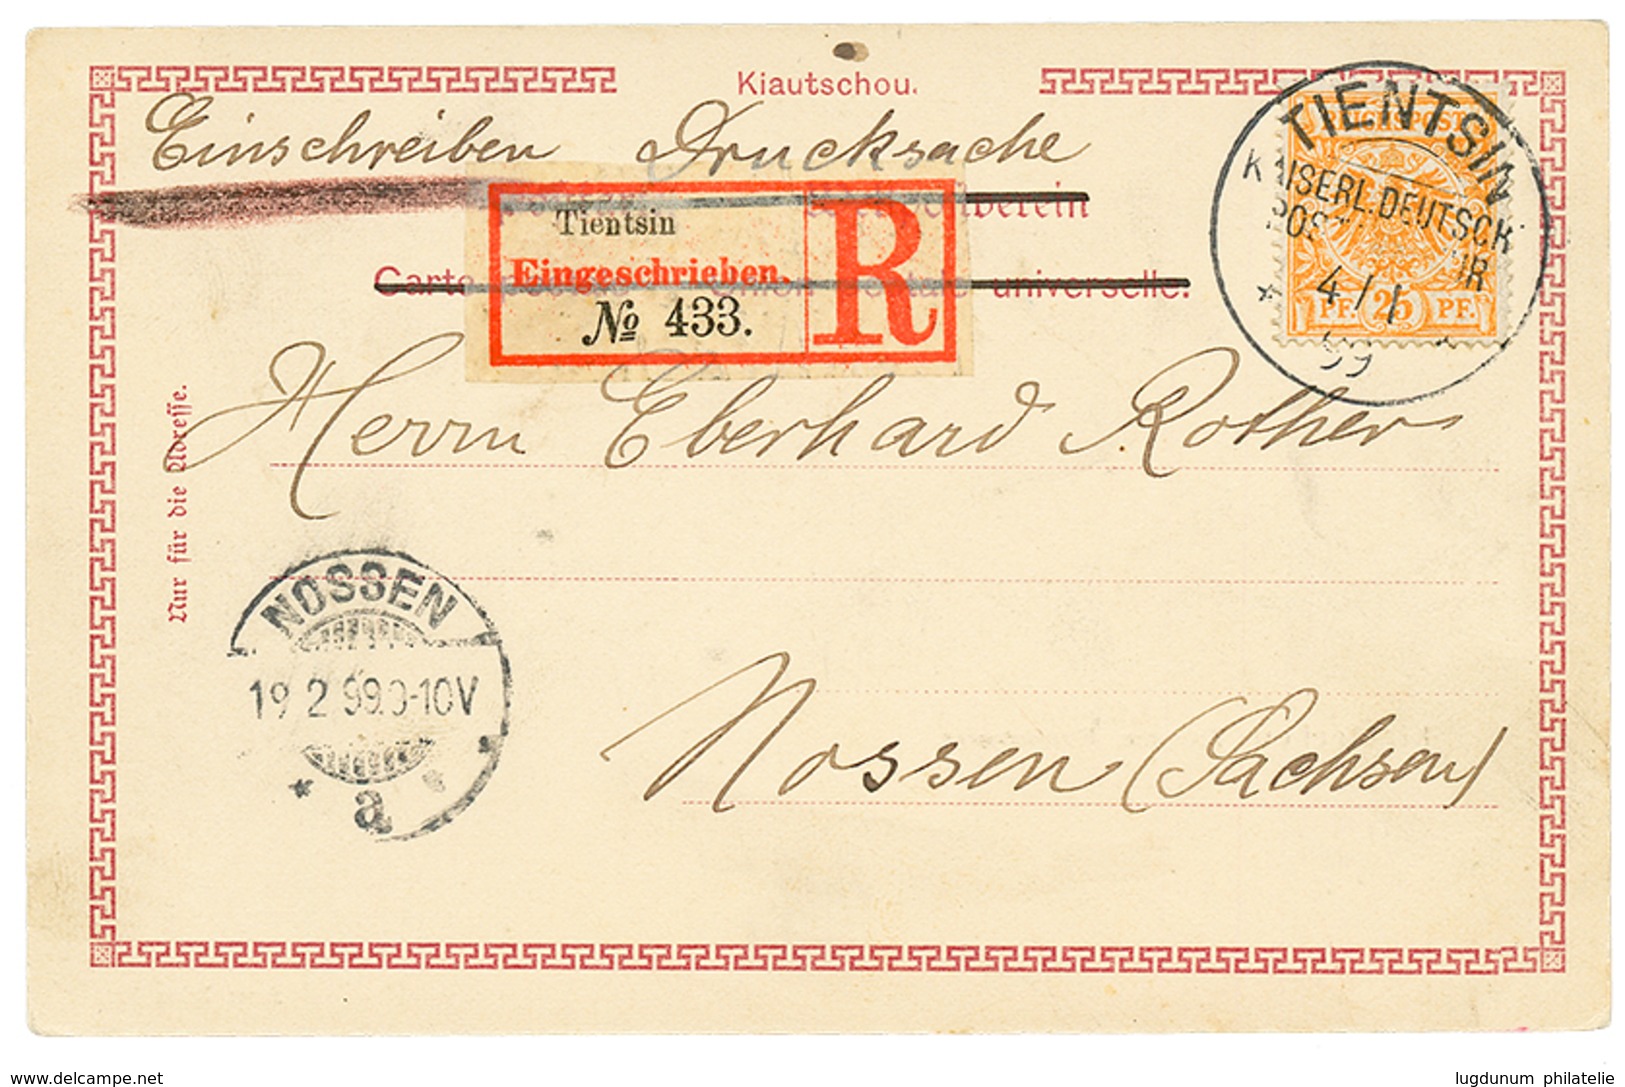 CHINA - VORLAUFER : 1899 25pf Canc. TIENTSIN On REGISTERED Card To GERMANY. Superb. - Deutsche Post In China